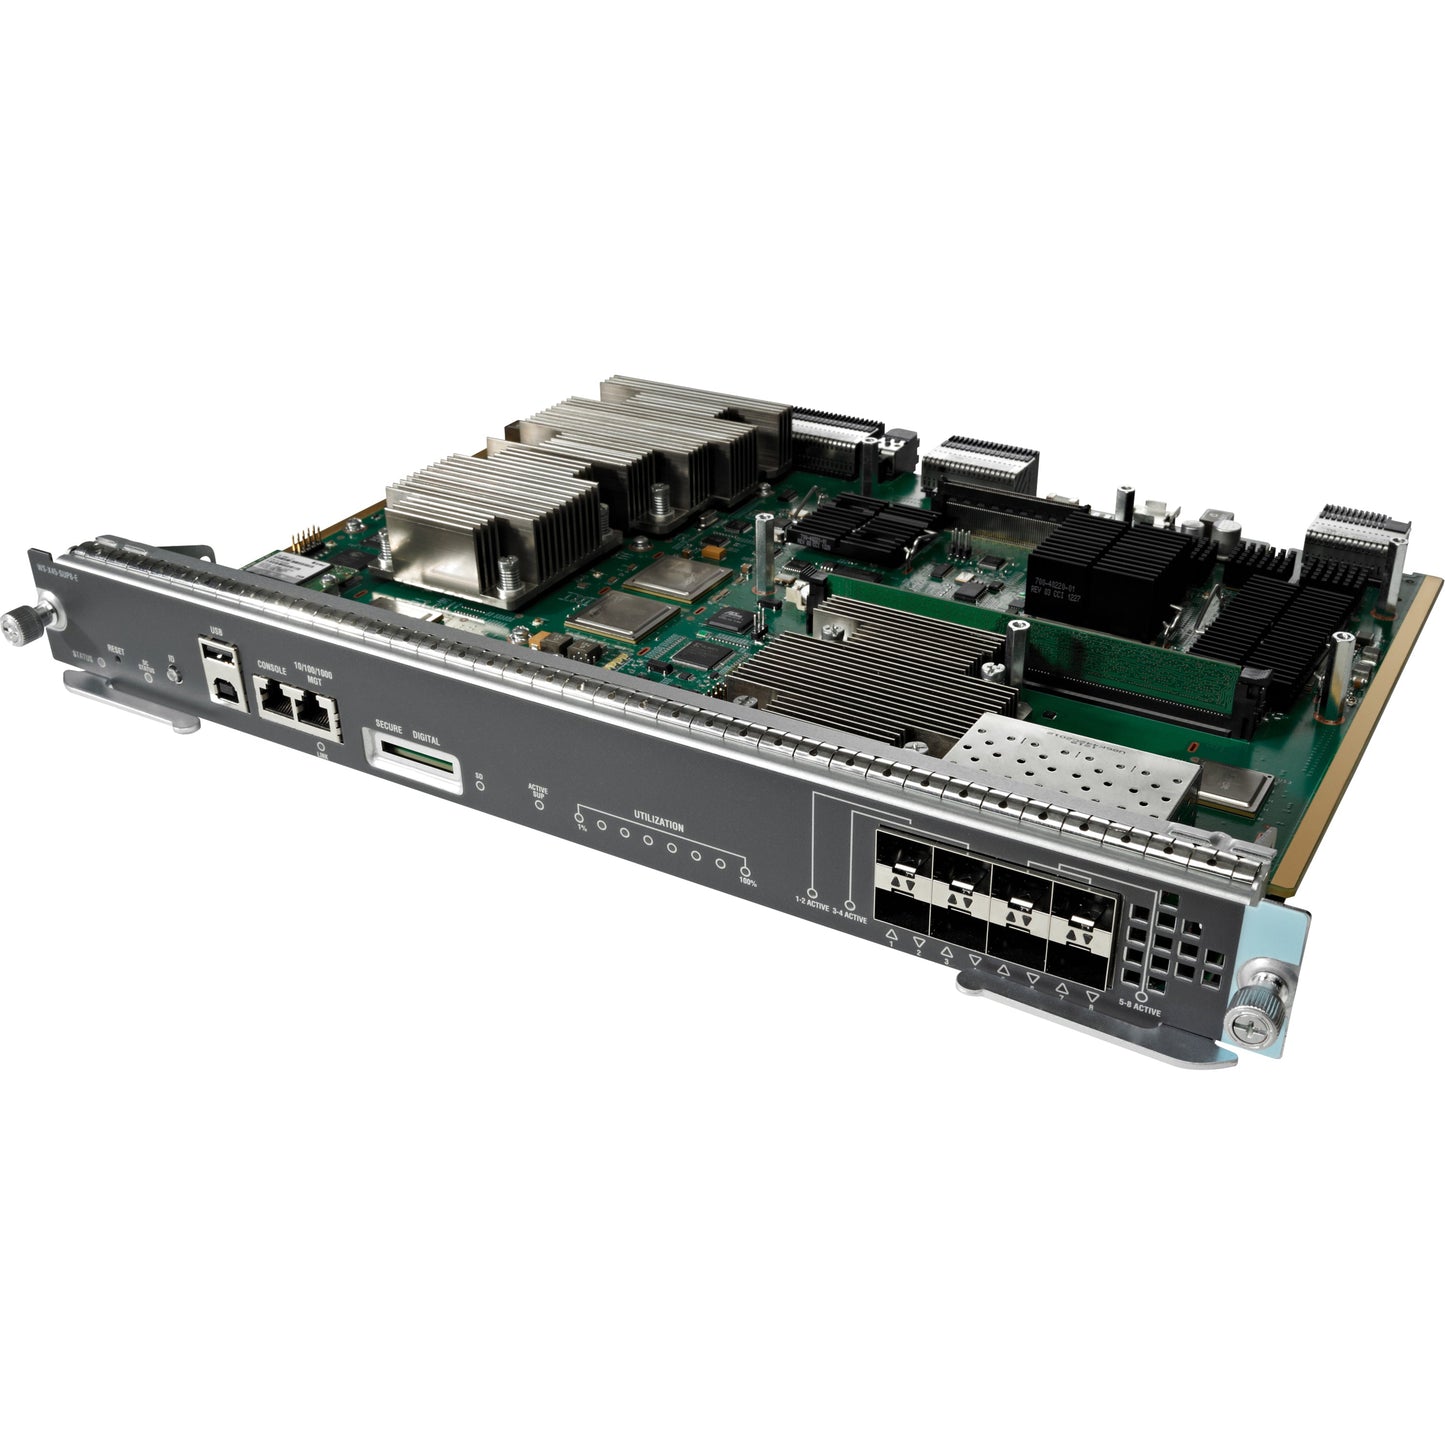 Cisco Catalyst 4500E Series Unified Access Supervisor 928 Gbps